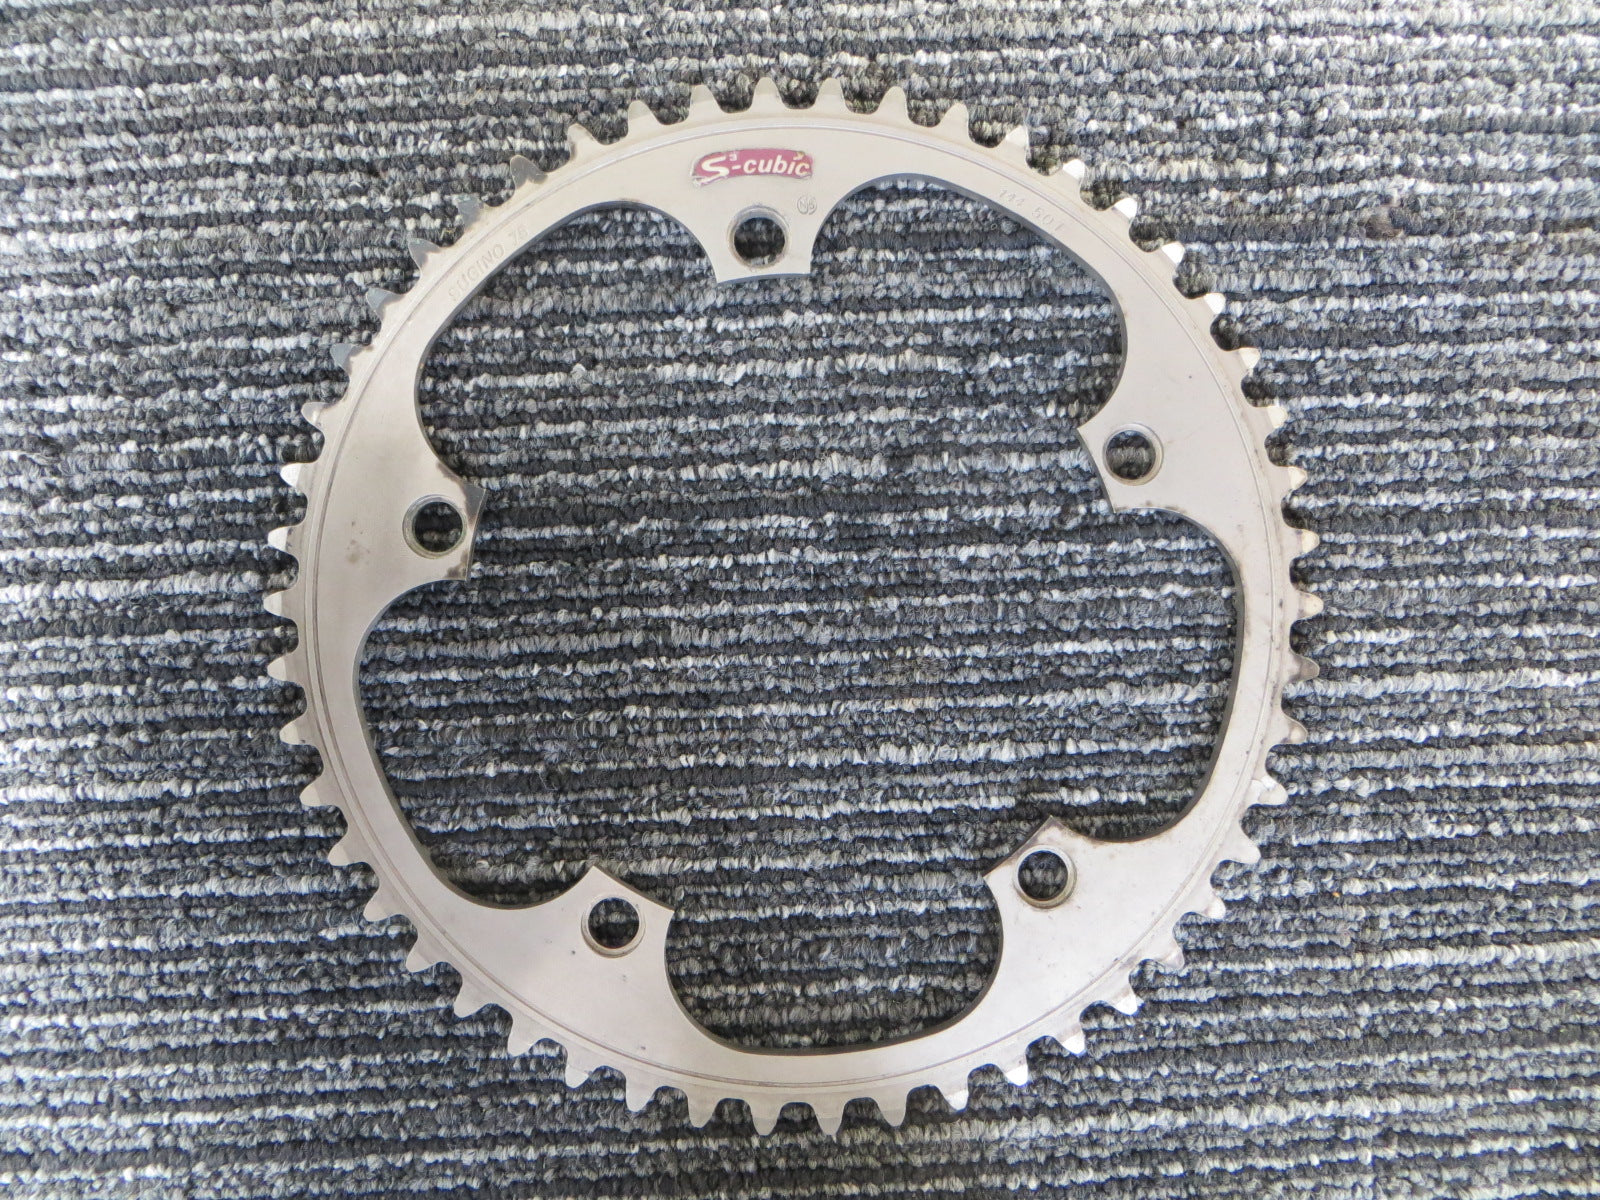 Sugino 75 S-cubic 1/8" 144BCD NJS Chainring 50T Matte Finish (18071444)